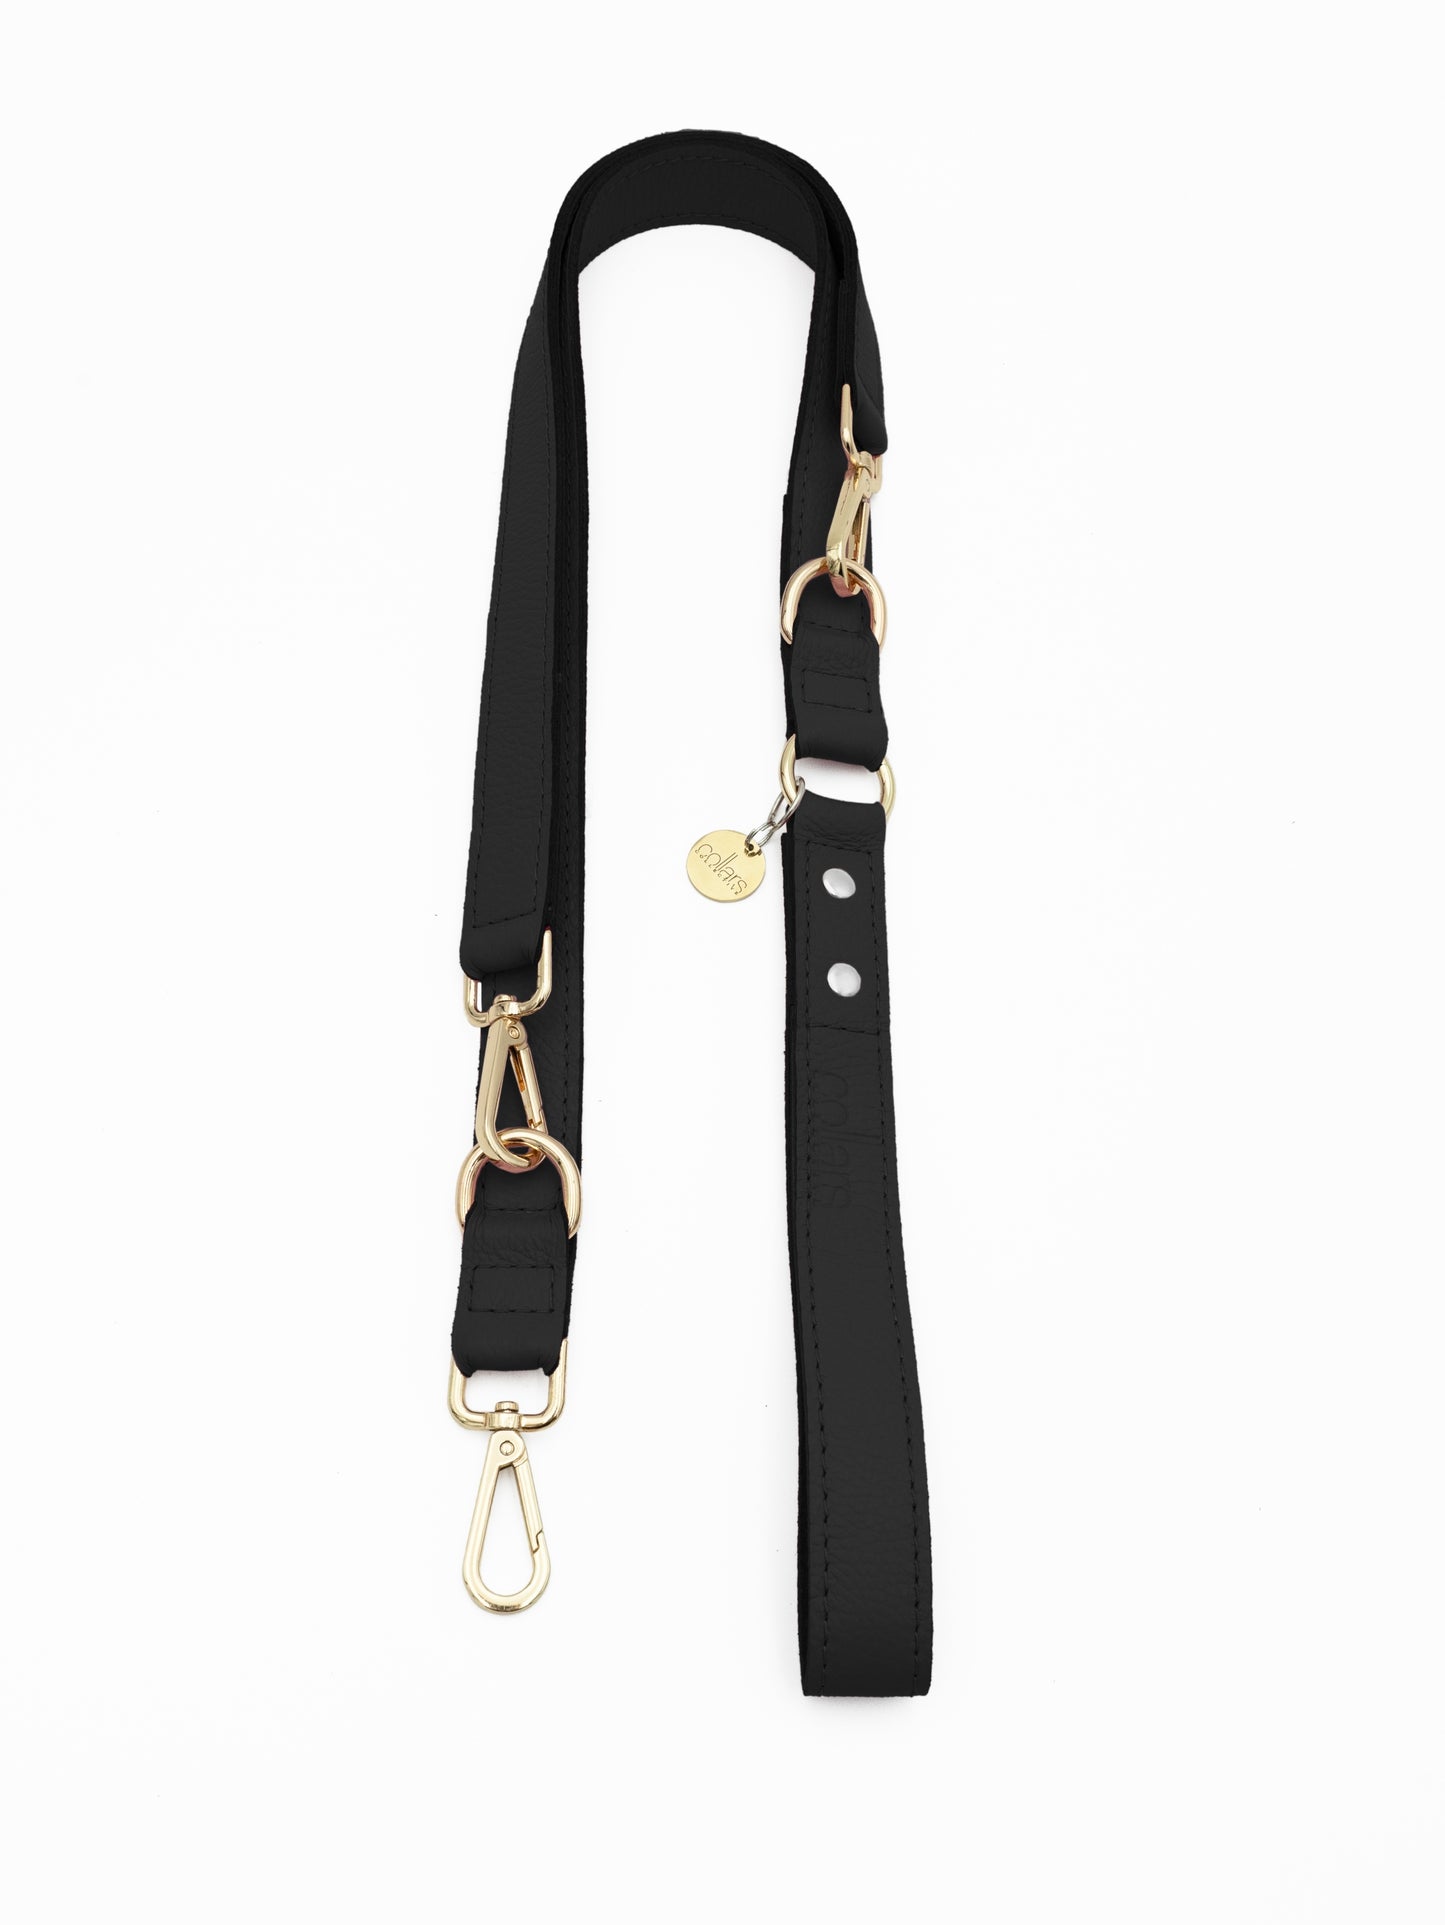 The Midnight Iconic Leash